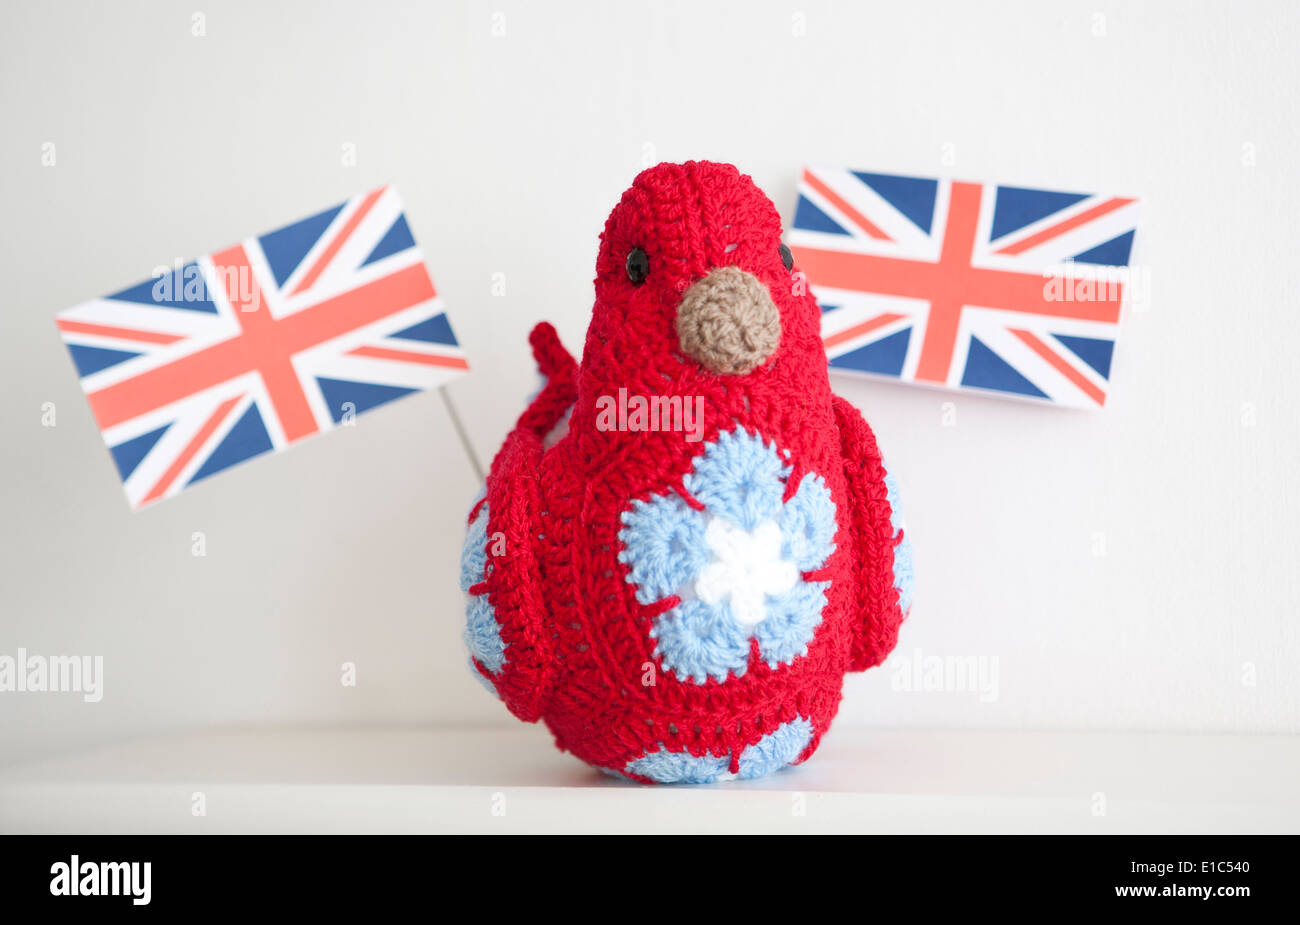 Union Jack carrying patriotic crocheted bird using African Flower Pentagons Stock Photo